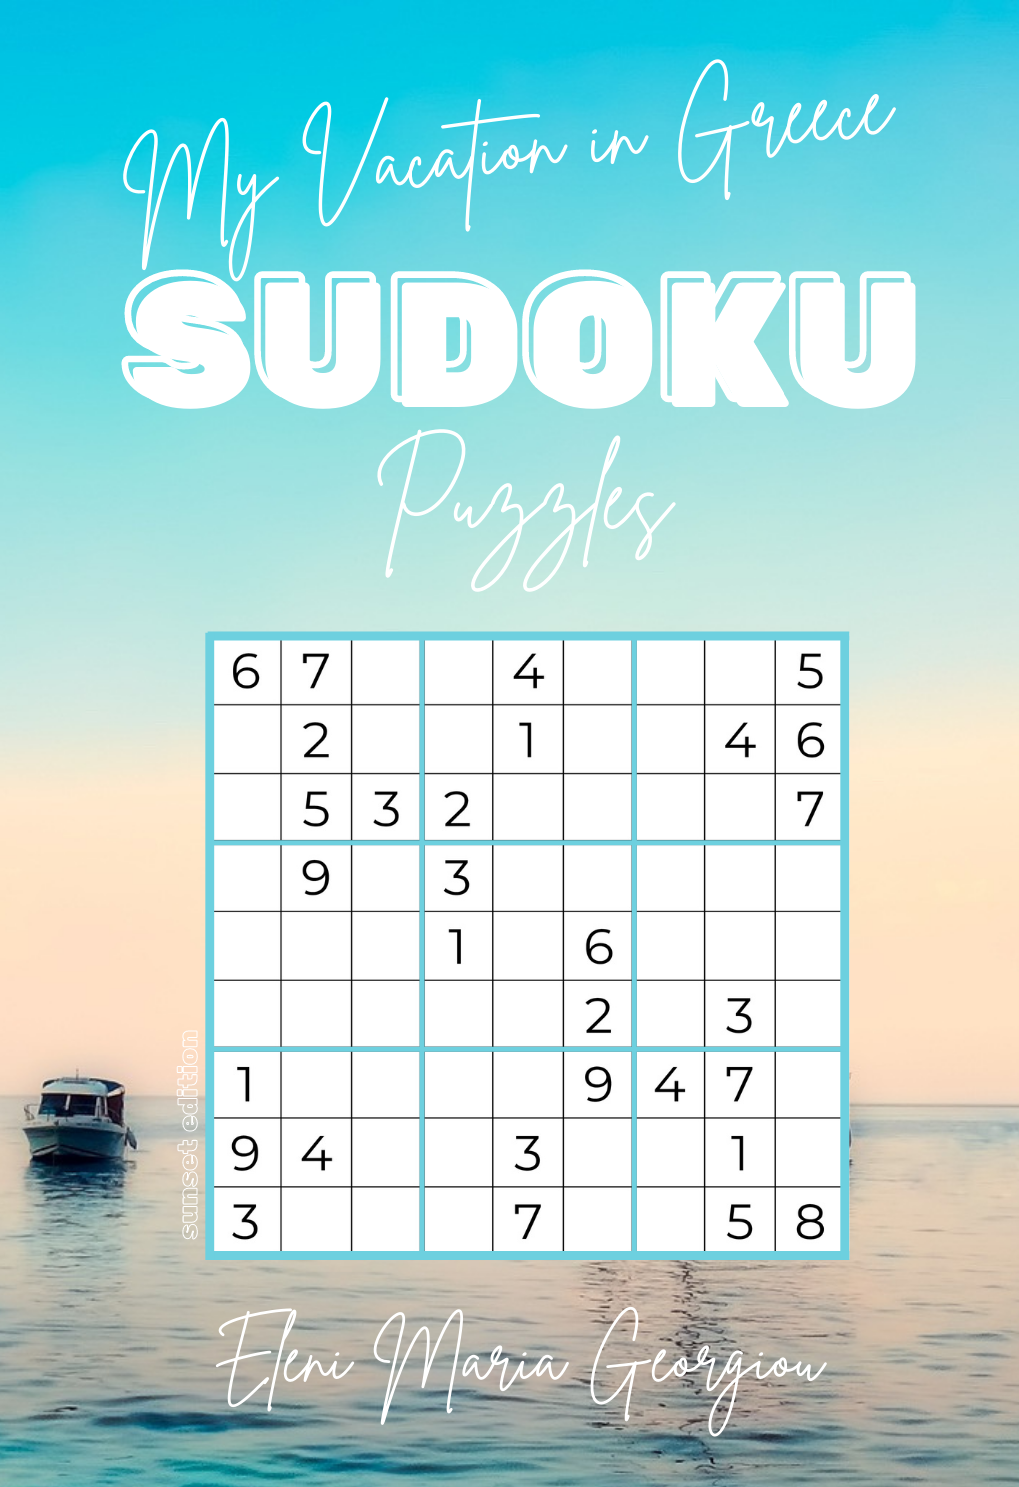 My Vacation in Greece SUDOKU Puzzles: Sunset Edition